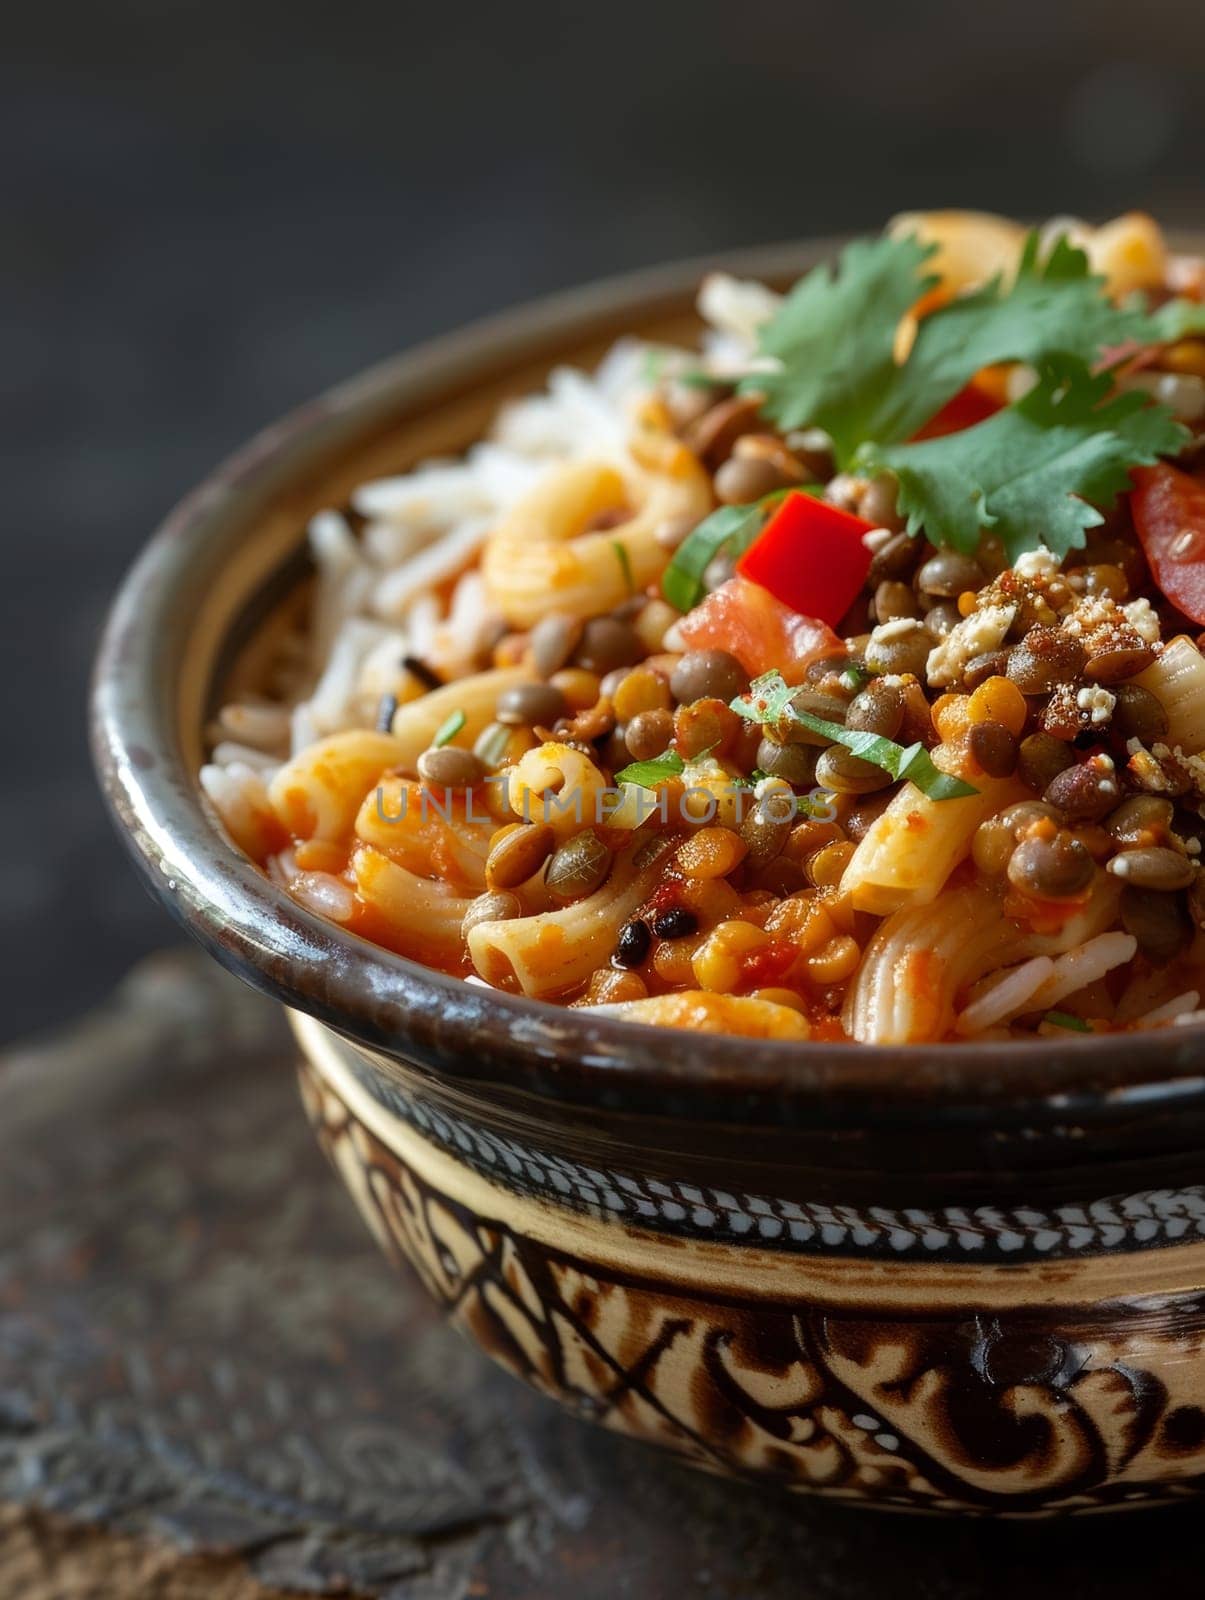 Egyptian koshari, a hearty dish with layers of rice, macaroni, lentils, and a spicy tomato sauce, representing the flavors of Egypt. by sfinks